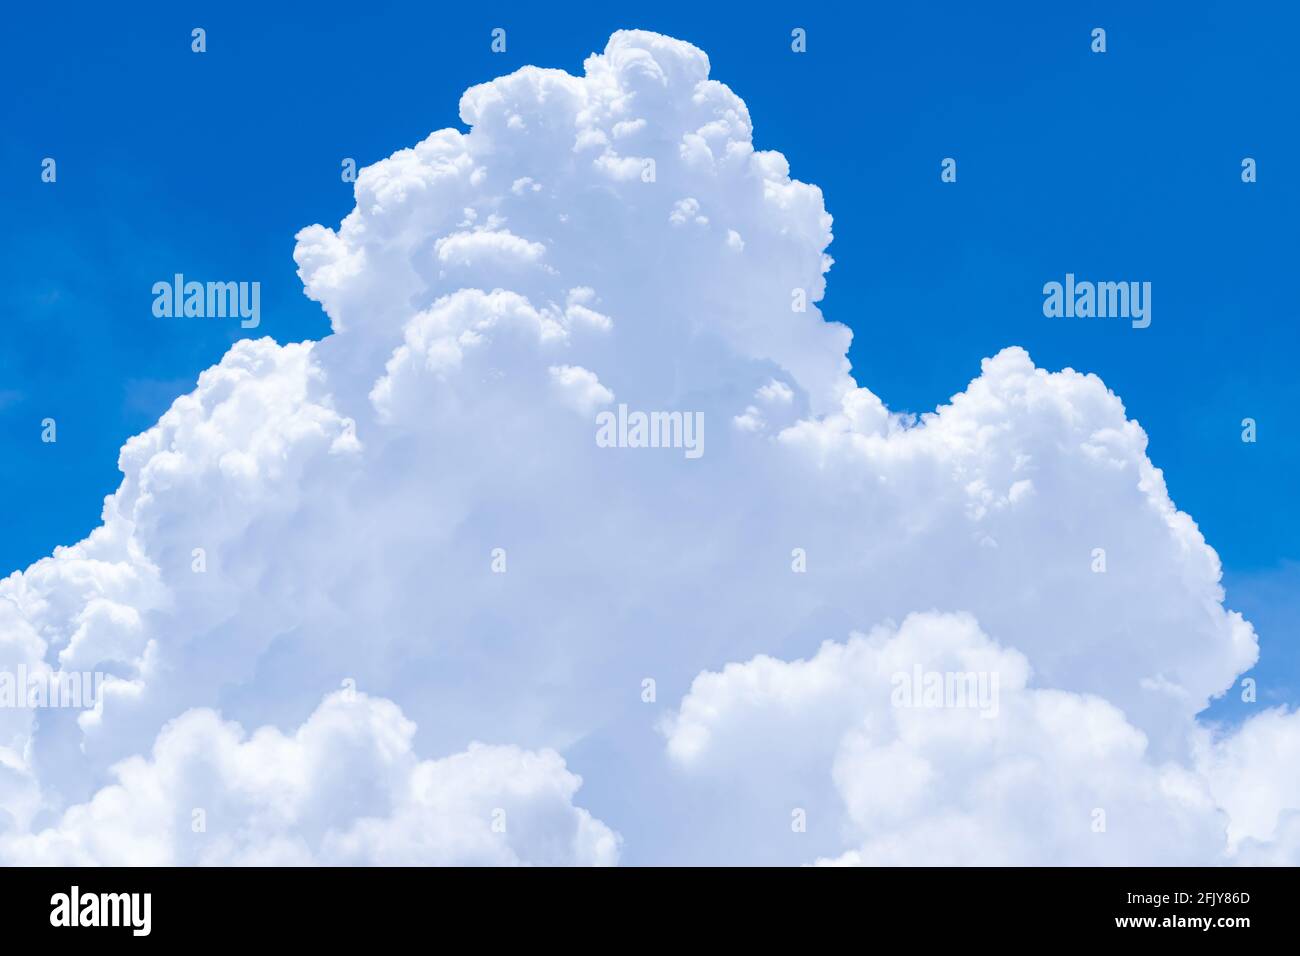 White fluffy clouds on blue sky. Soft touch feeling like cotton. White puffy cloudscape. Beauty in nature. Close-up white cumulus clouds texture. Stock Photo